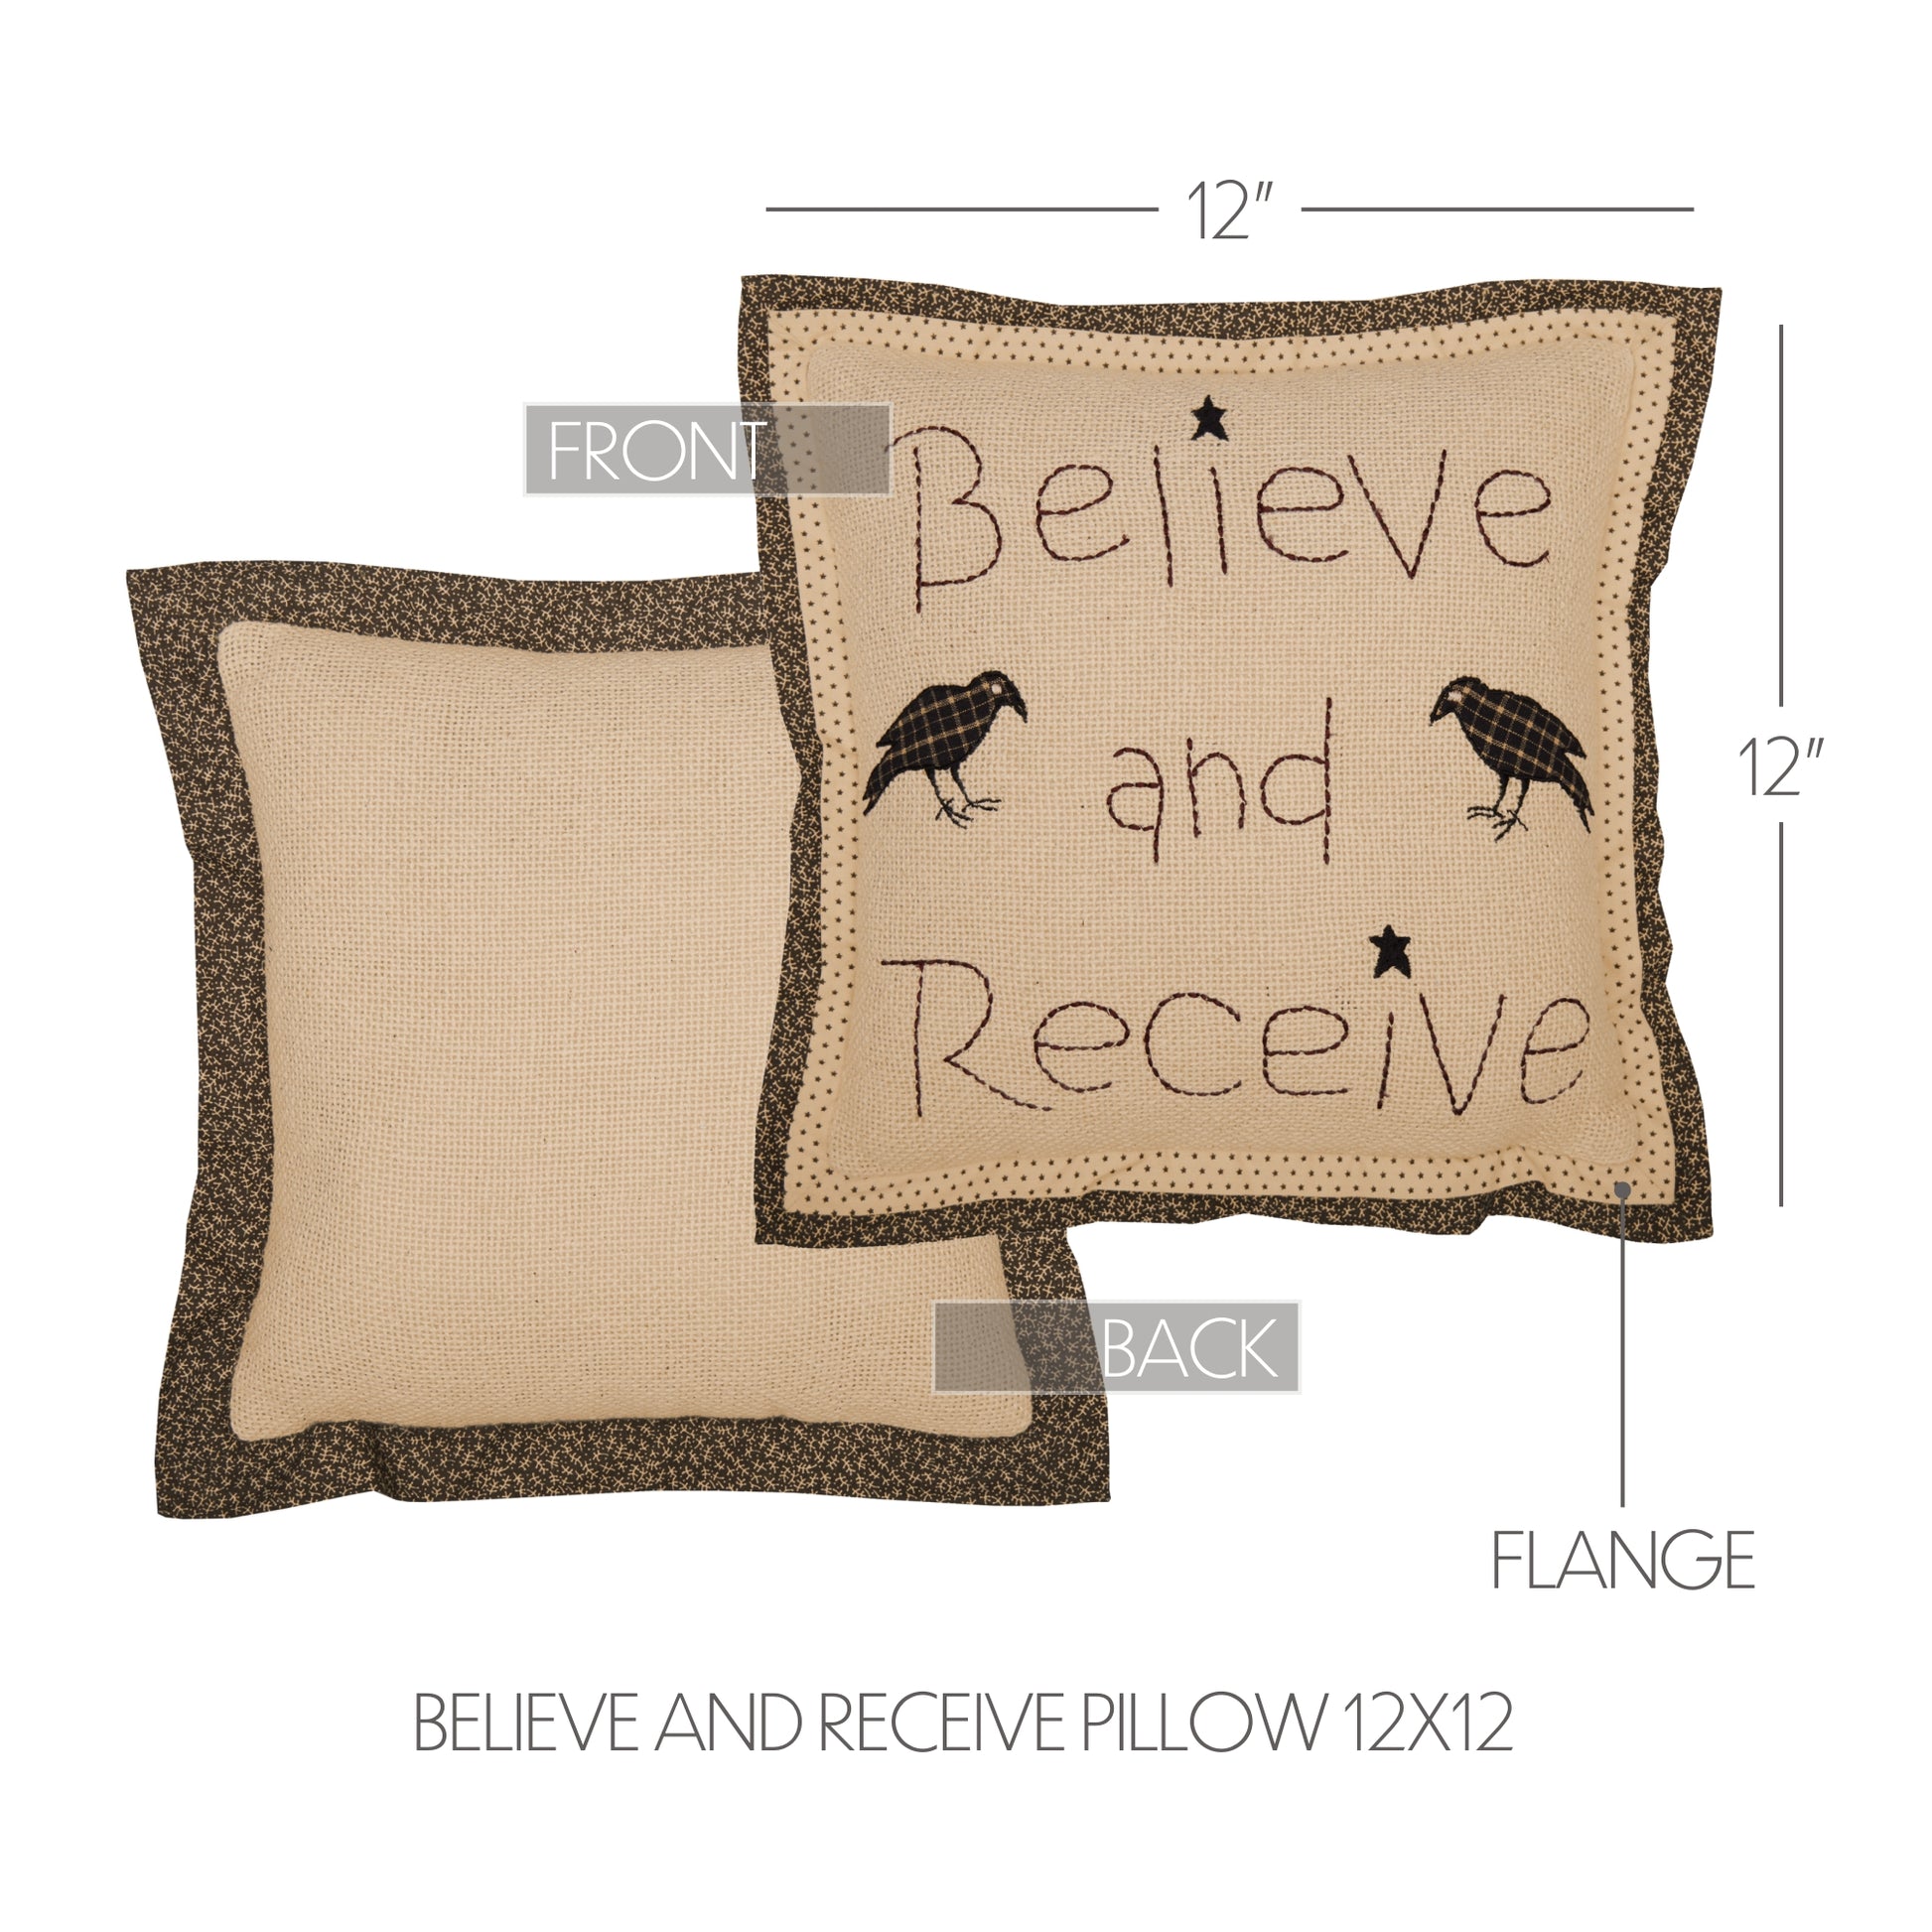 54618-Kettle-Grove-Believe-and-Receive-Pillow-12x12-image-1